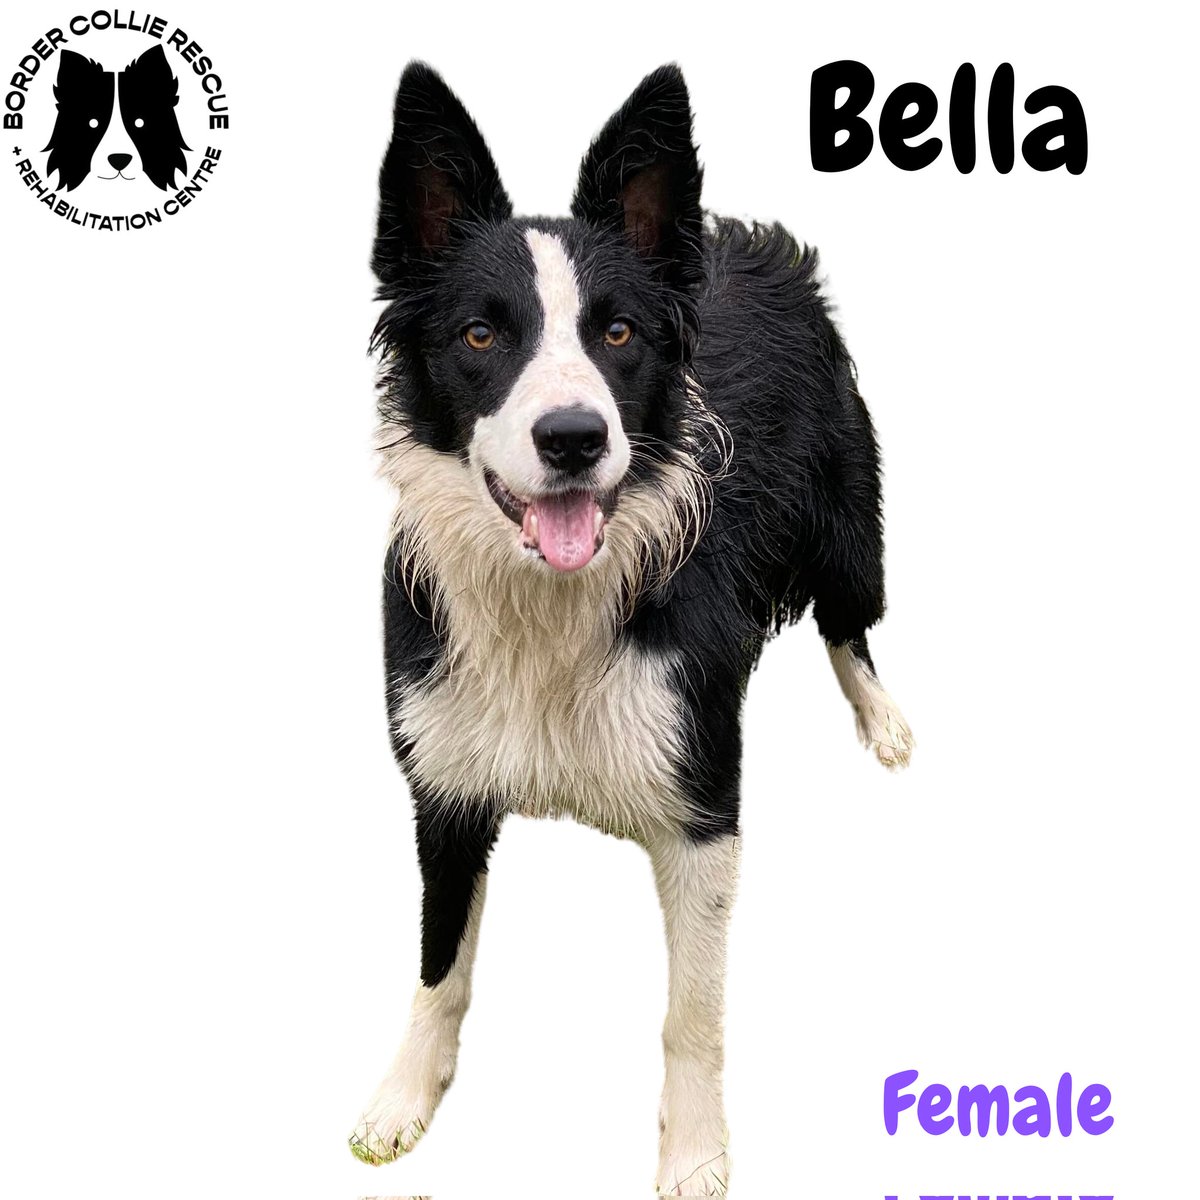 🖤AVAILABLE FOR ADOPTION🖤 Bella is around 14 months old. She's a busy little girl and loves her ball (no surprises there!). She's neutered and we think she might like agility. She's a lovely girl looking for a collie experienced home. Please RT 🙏